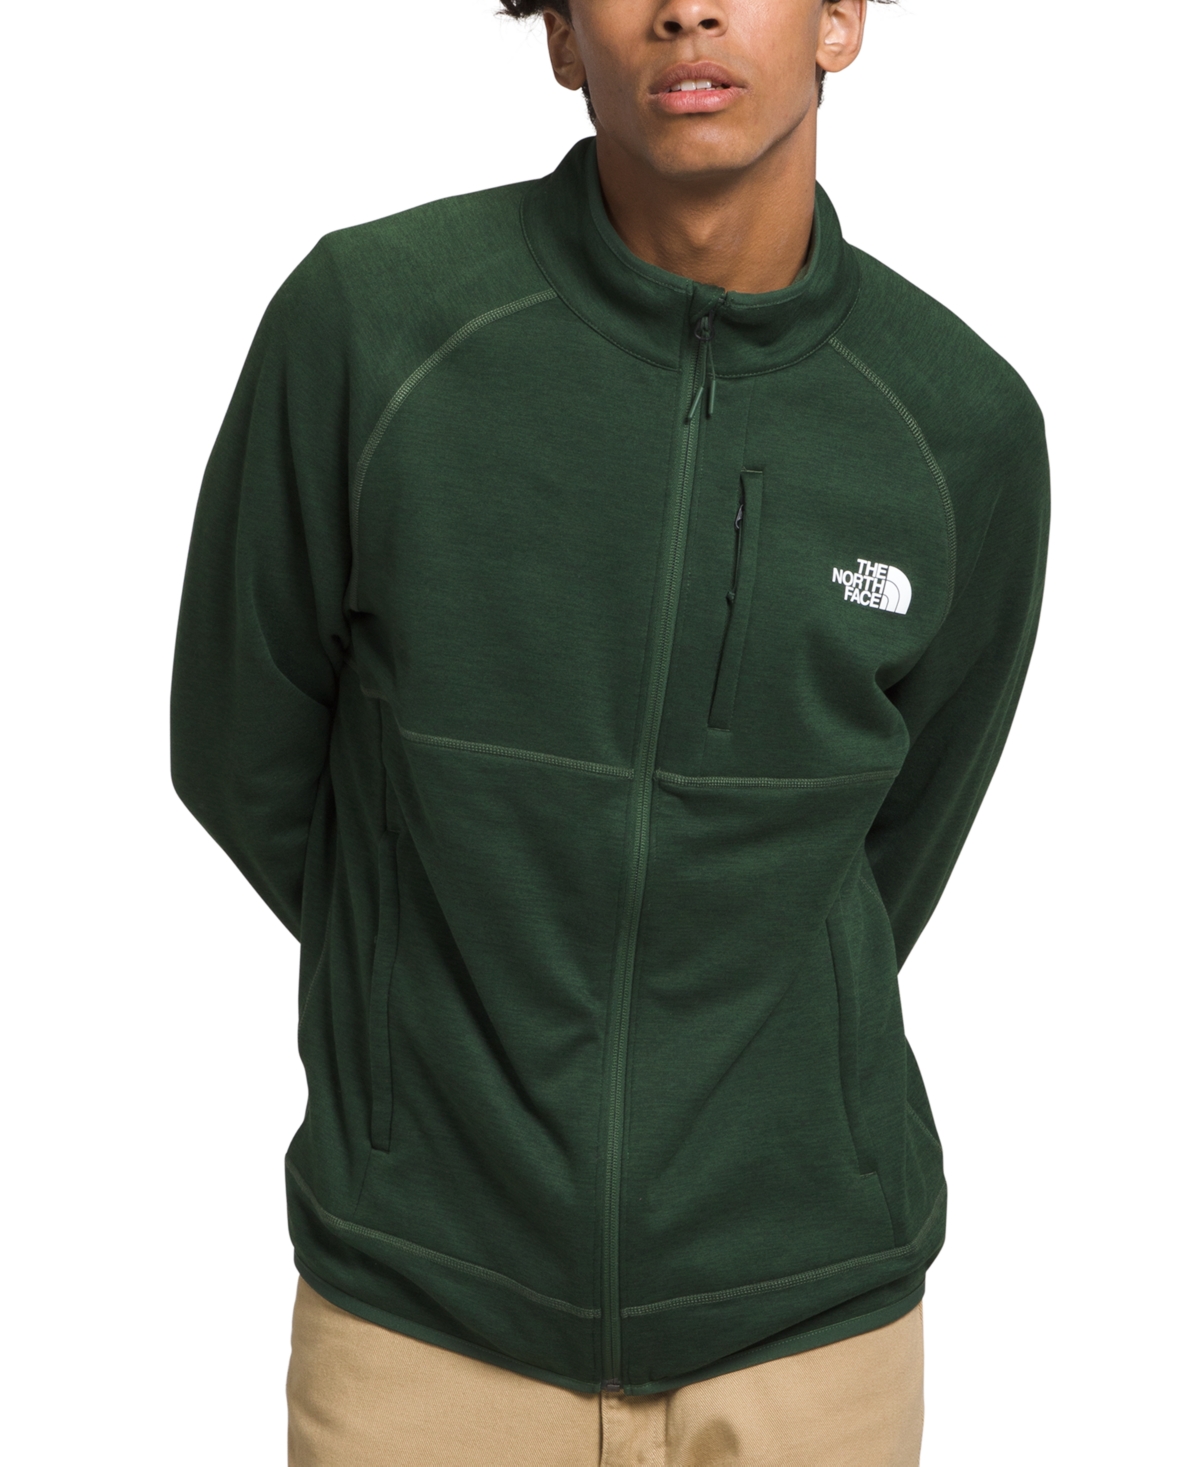 THE NORTH FACE MEN'S CANYONLANDS HOODIE JACKET